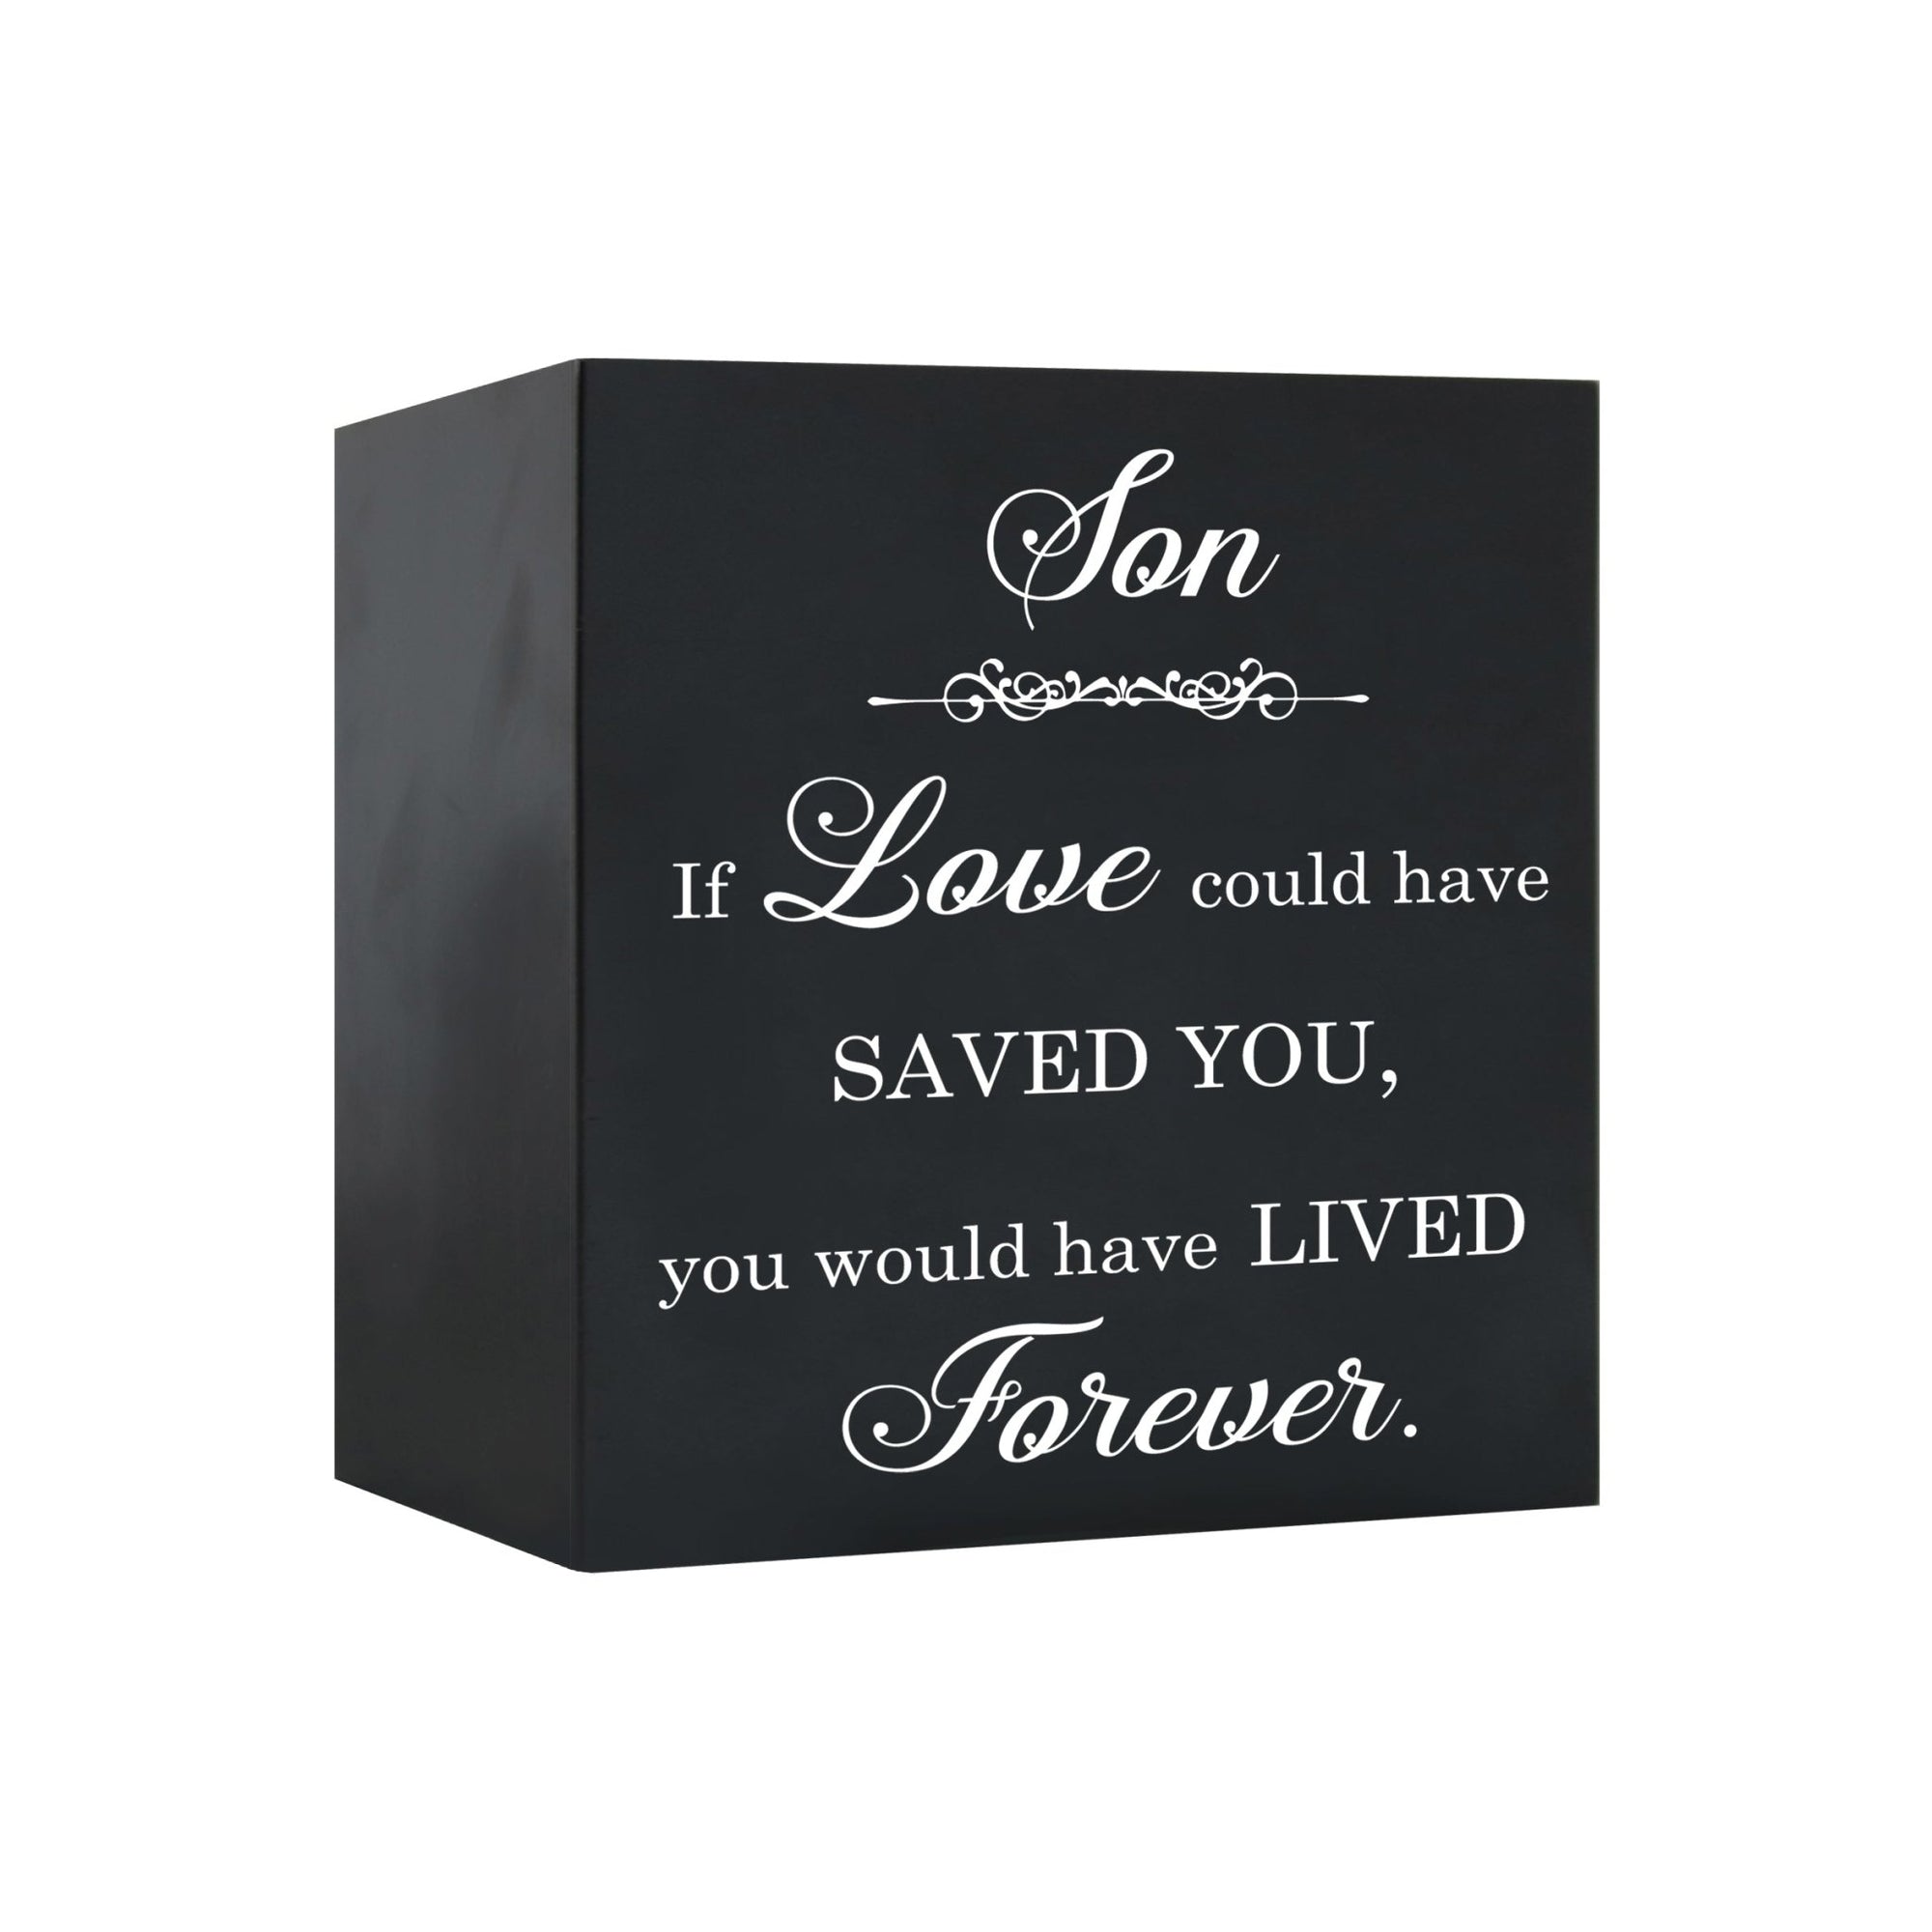 Memorial Bereavement Keepsake Cremation Shadow Box and Urn 6x6in Holds 53 Cu Inches Of Human Ashes Son, If Love Could - LifeSong Milestones